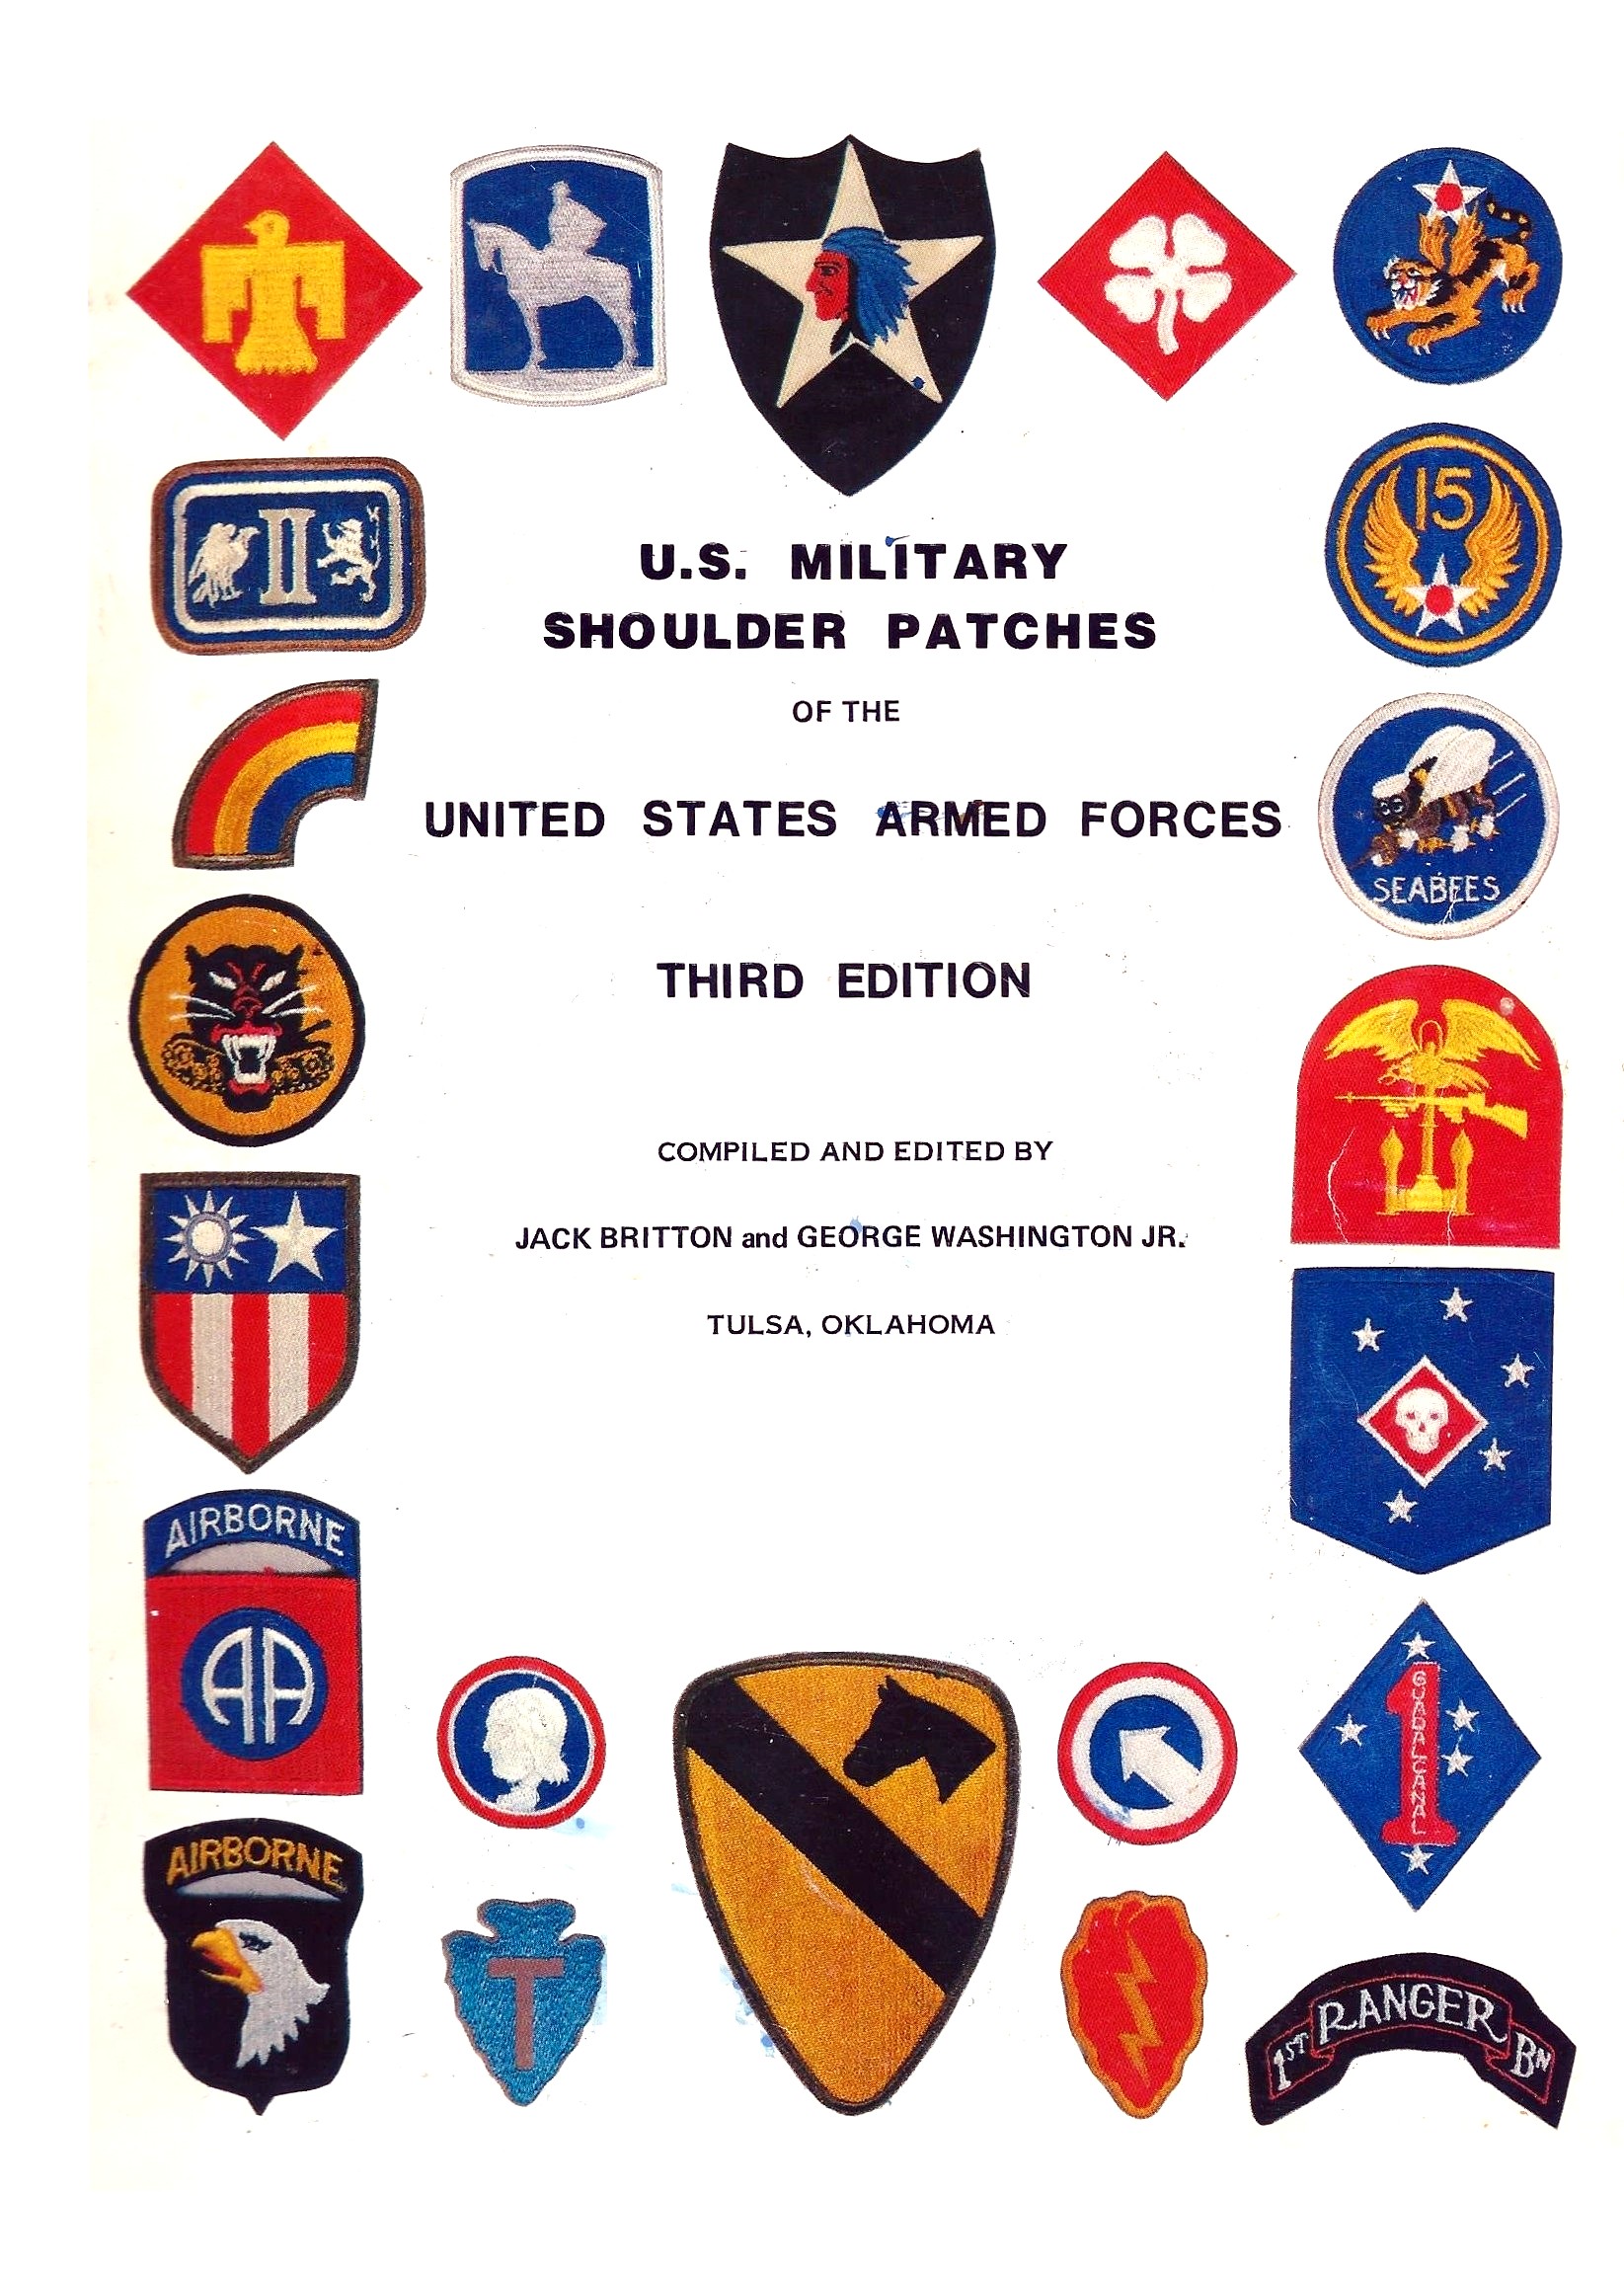 (Part 1 of 3 Parts) U.S. Military Shoulder Patches of the United States